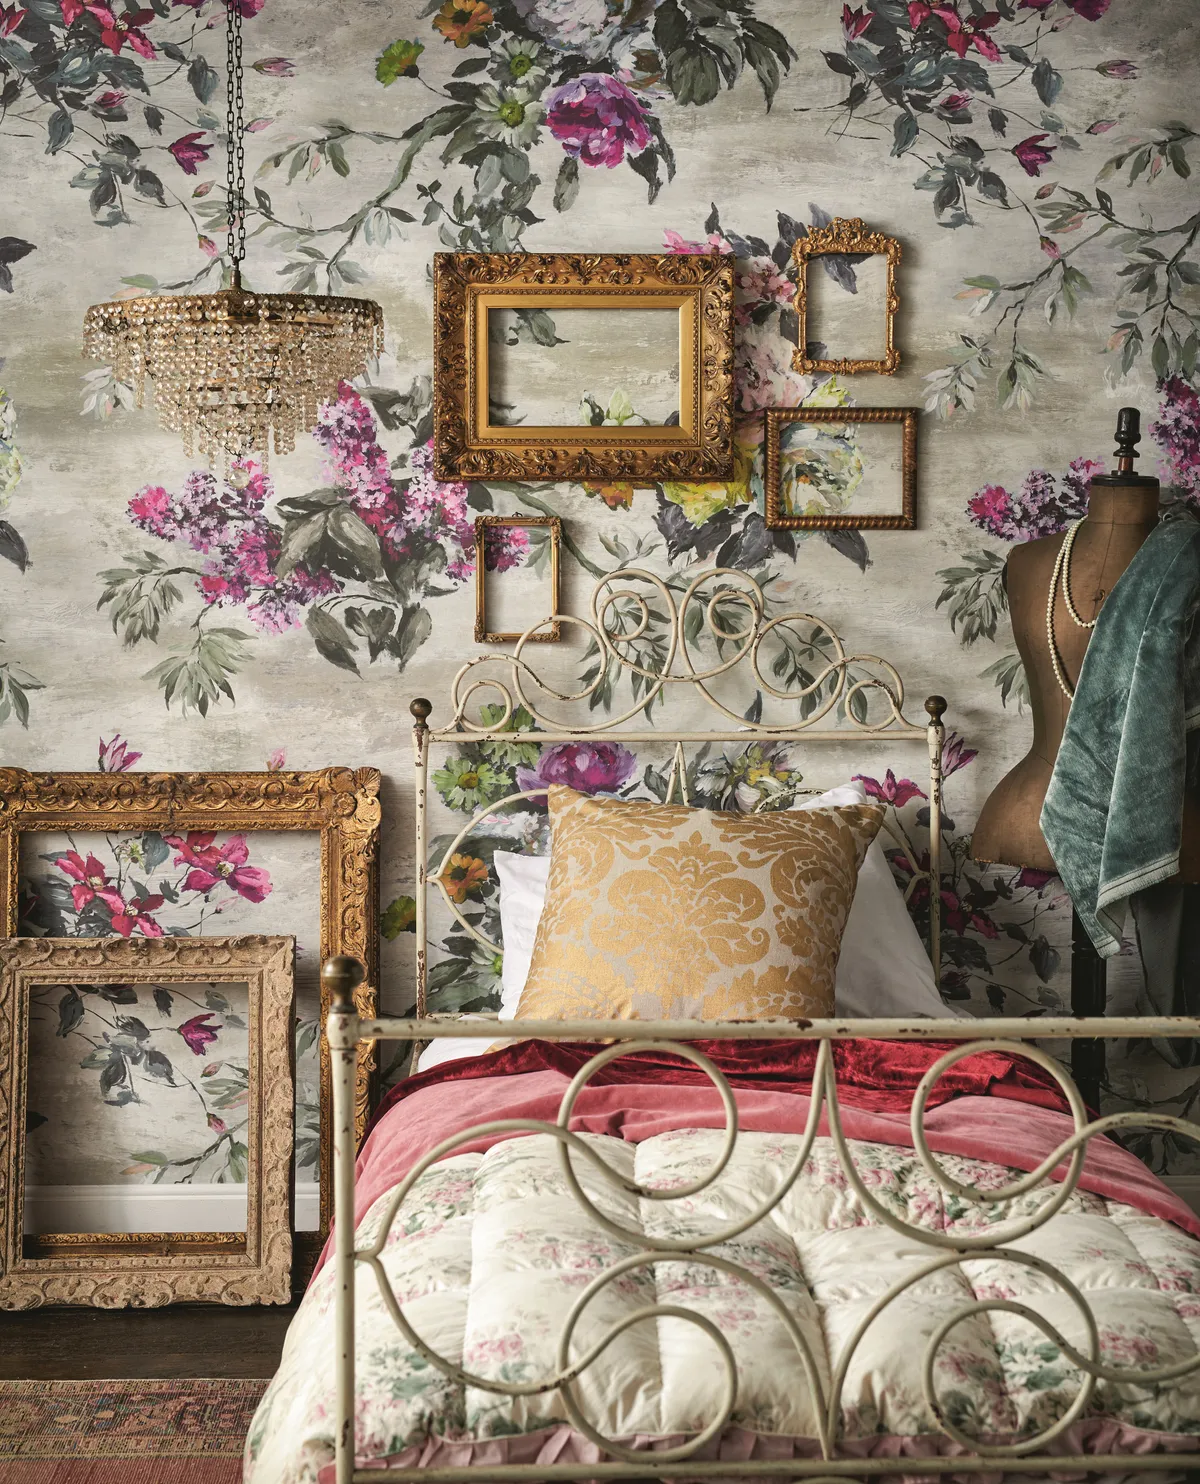 A vintage metal single bed against bold floral wallpaper. A cluster of antique frames is displayed above the headboard.